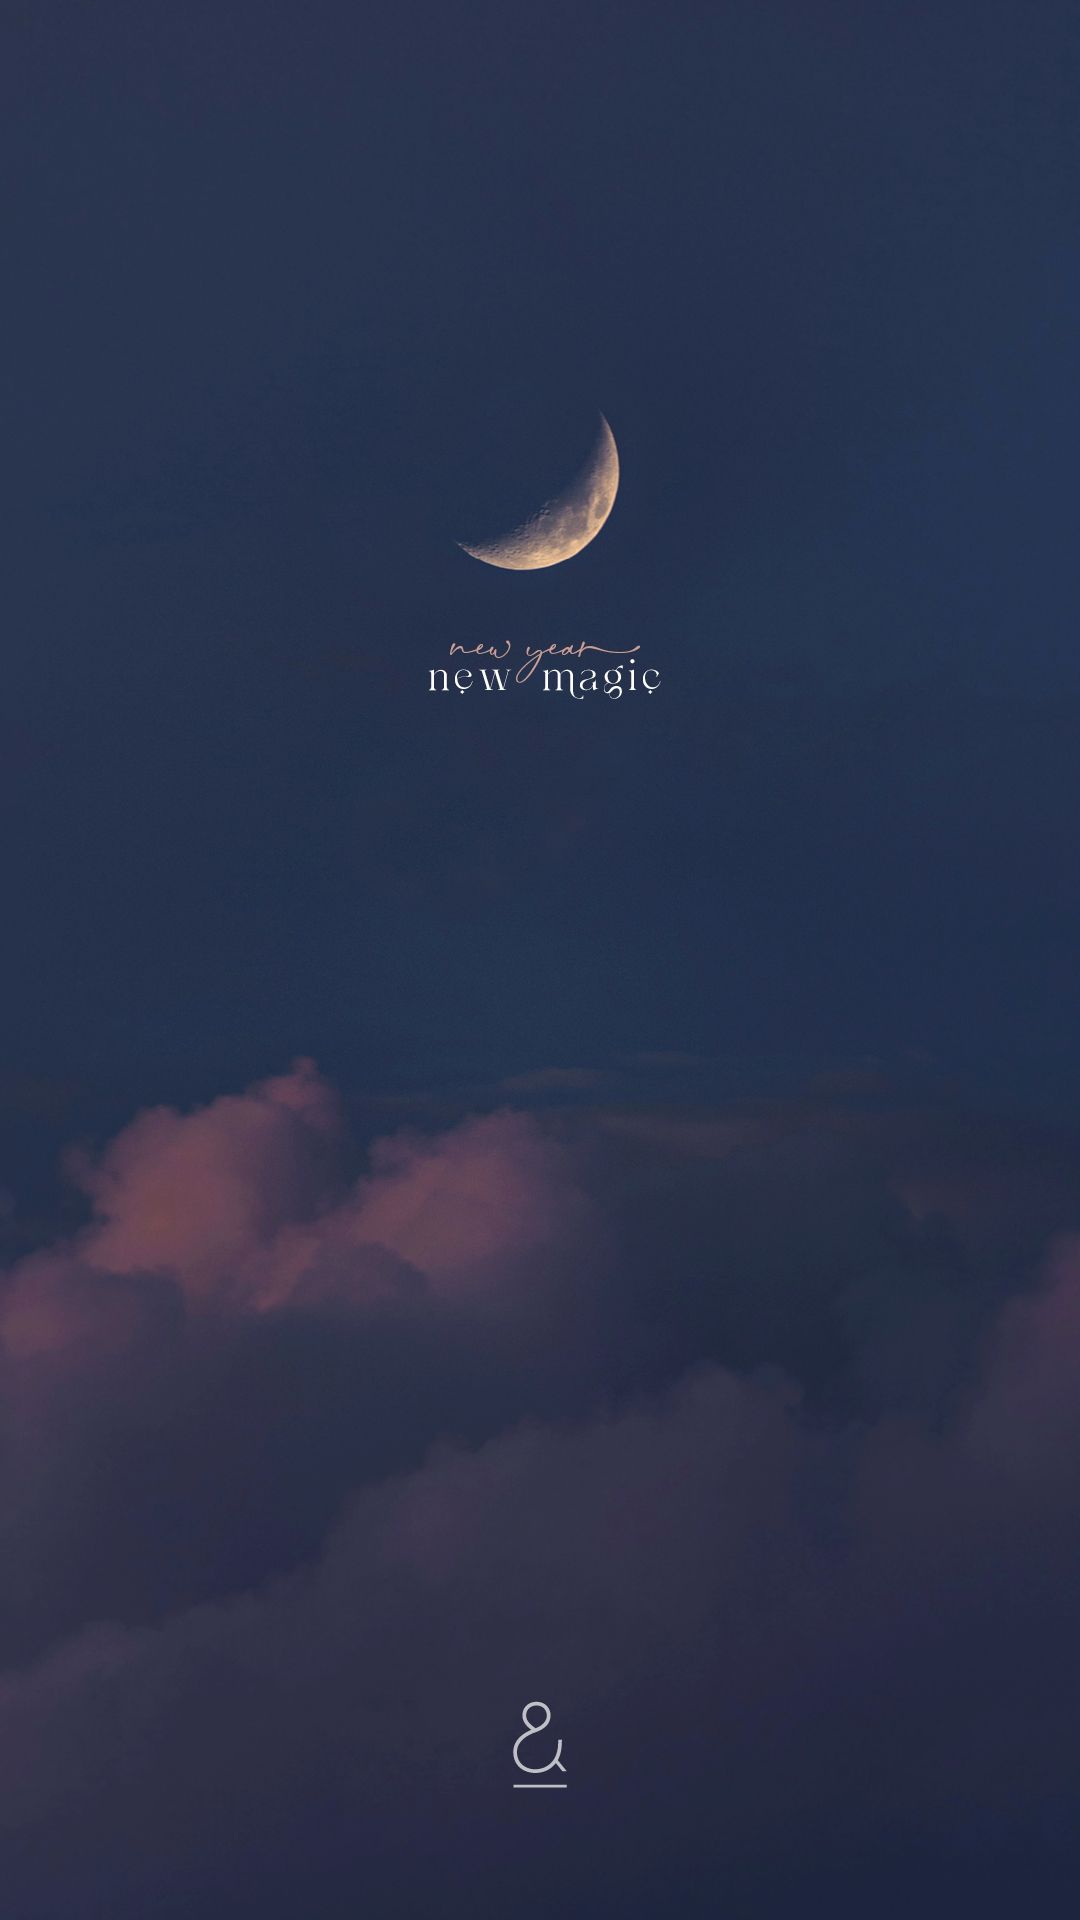 A moon is shown in the sky - Magic, moon